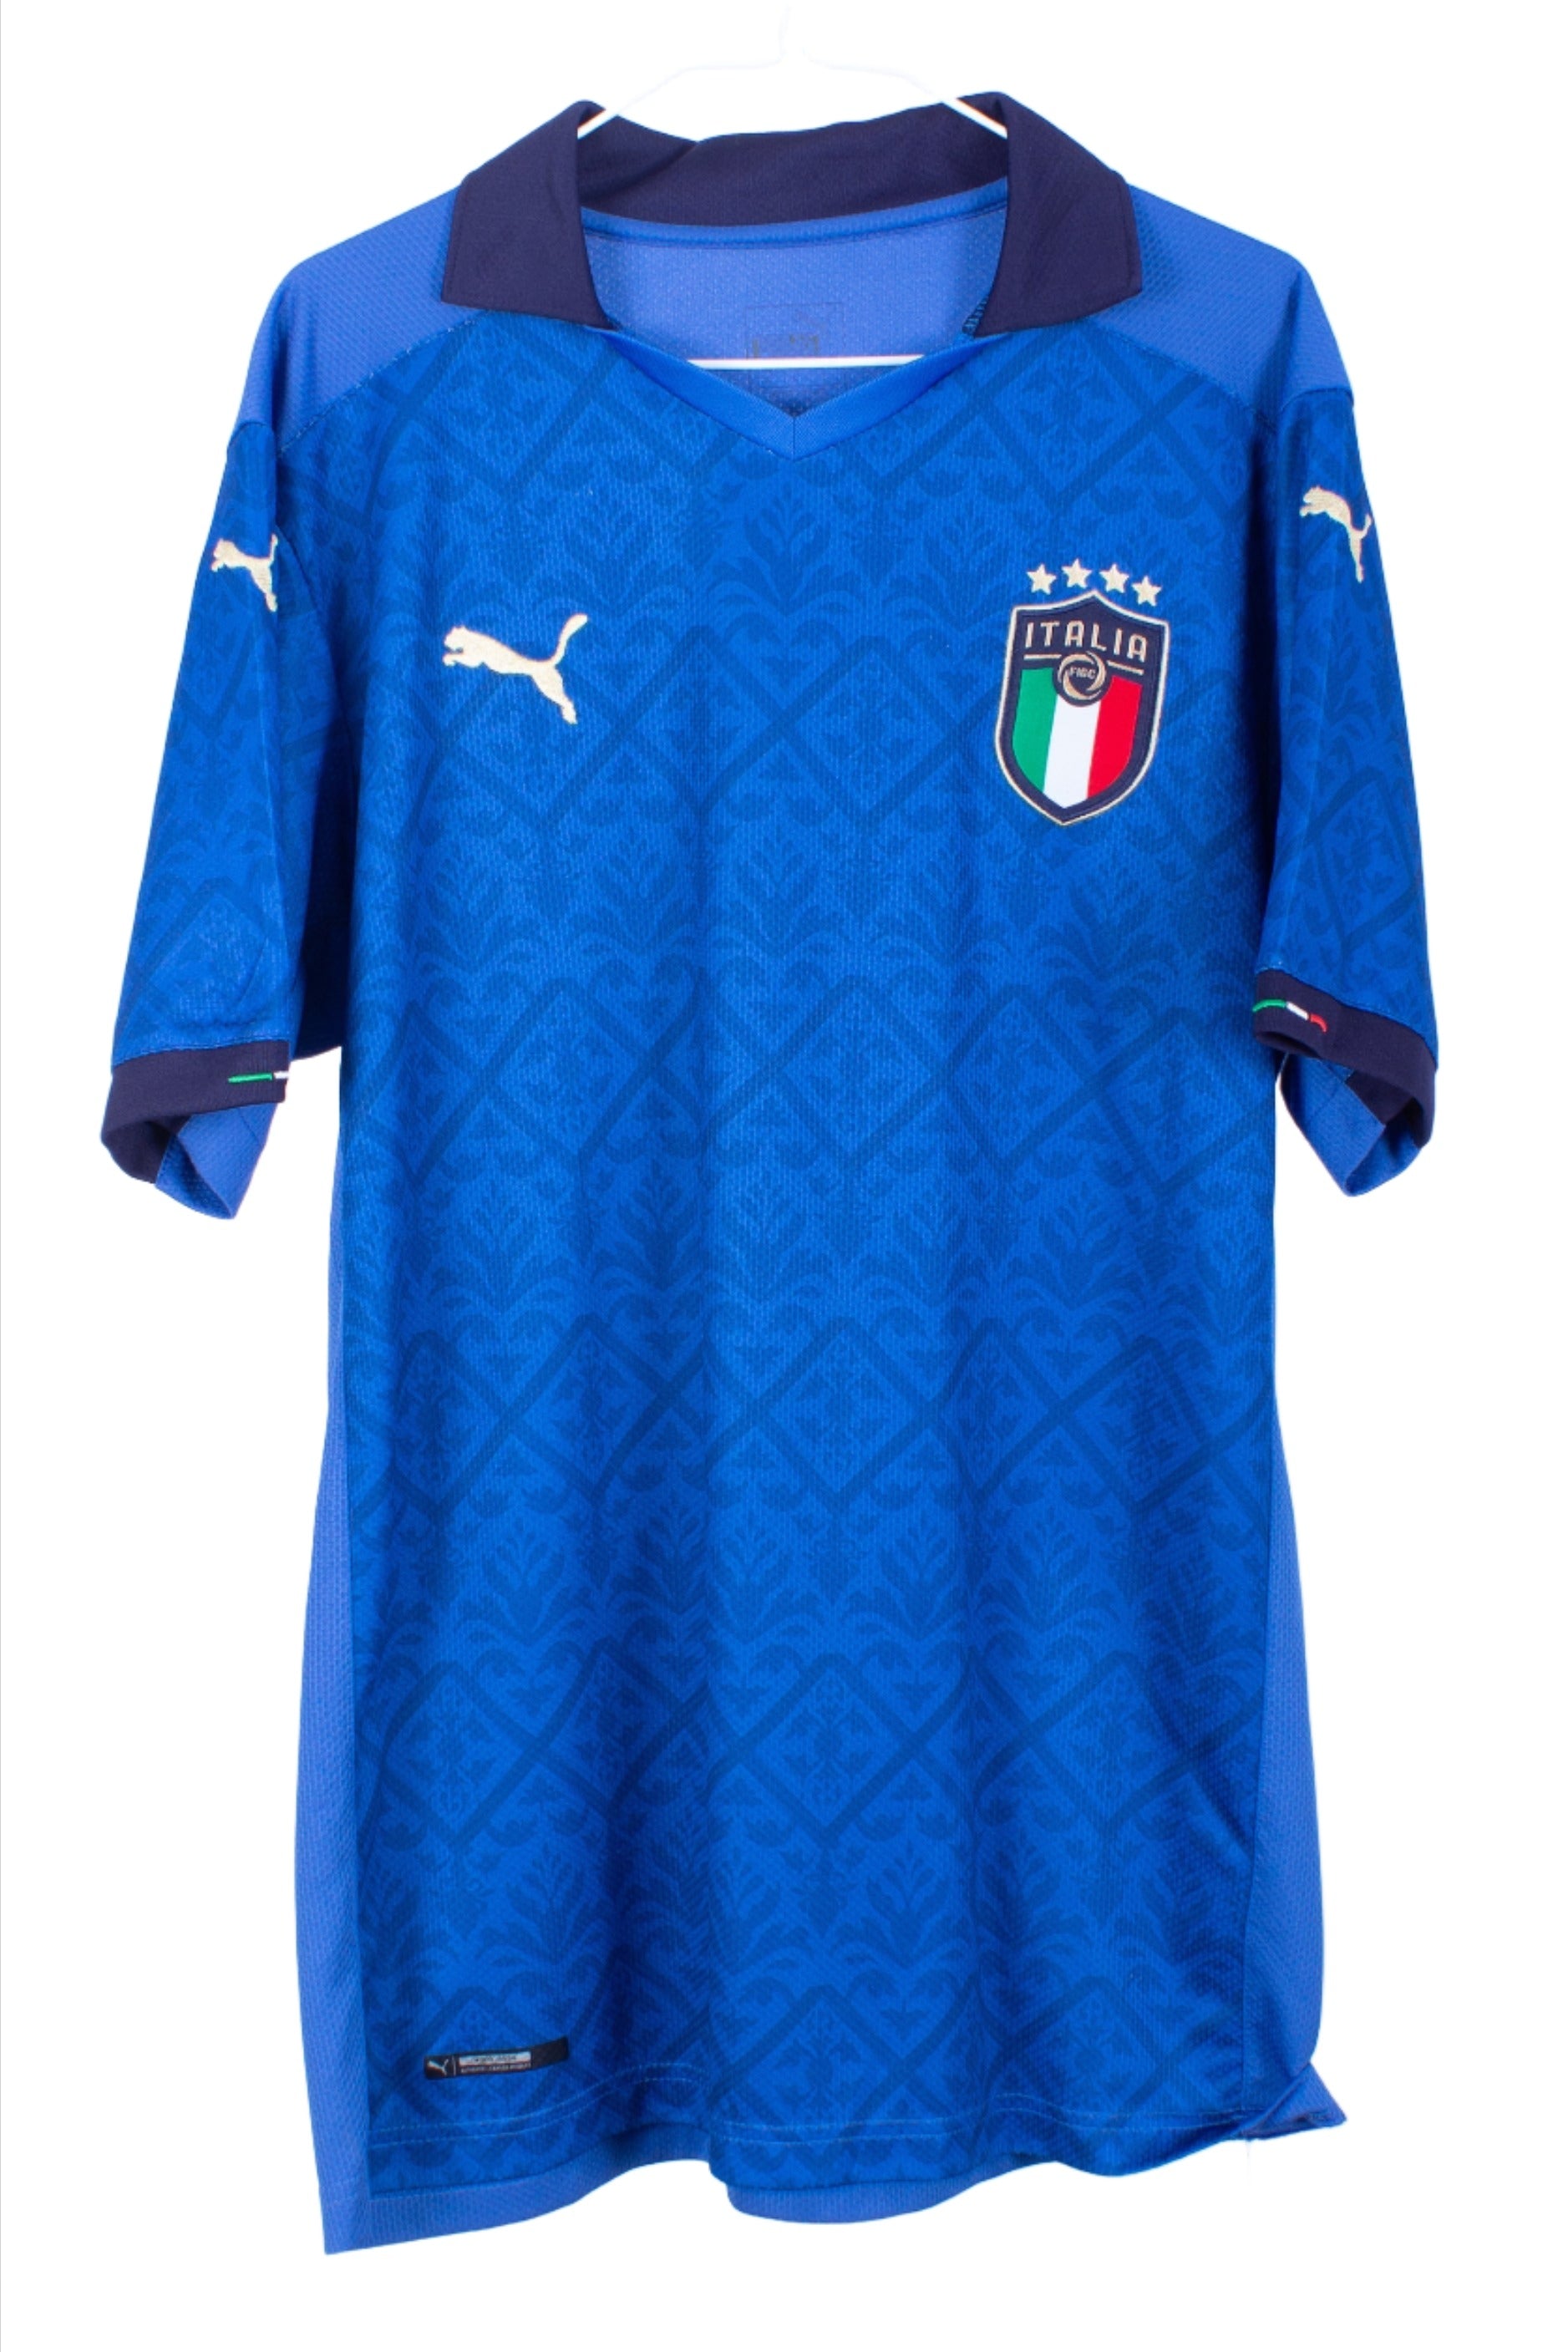 Italy 2020 Home Shirt (L)